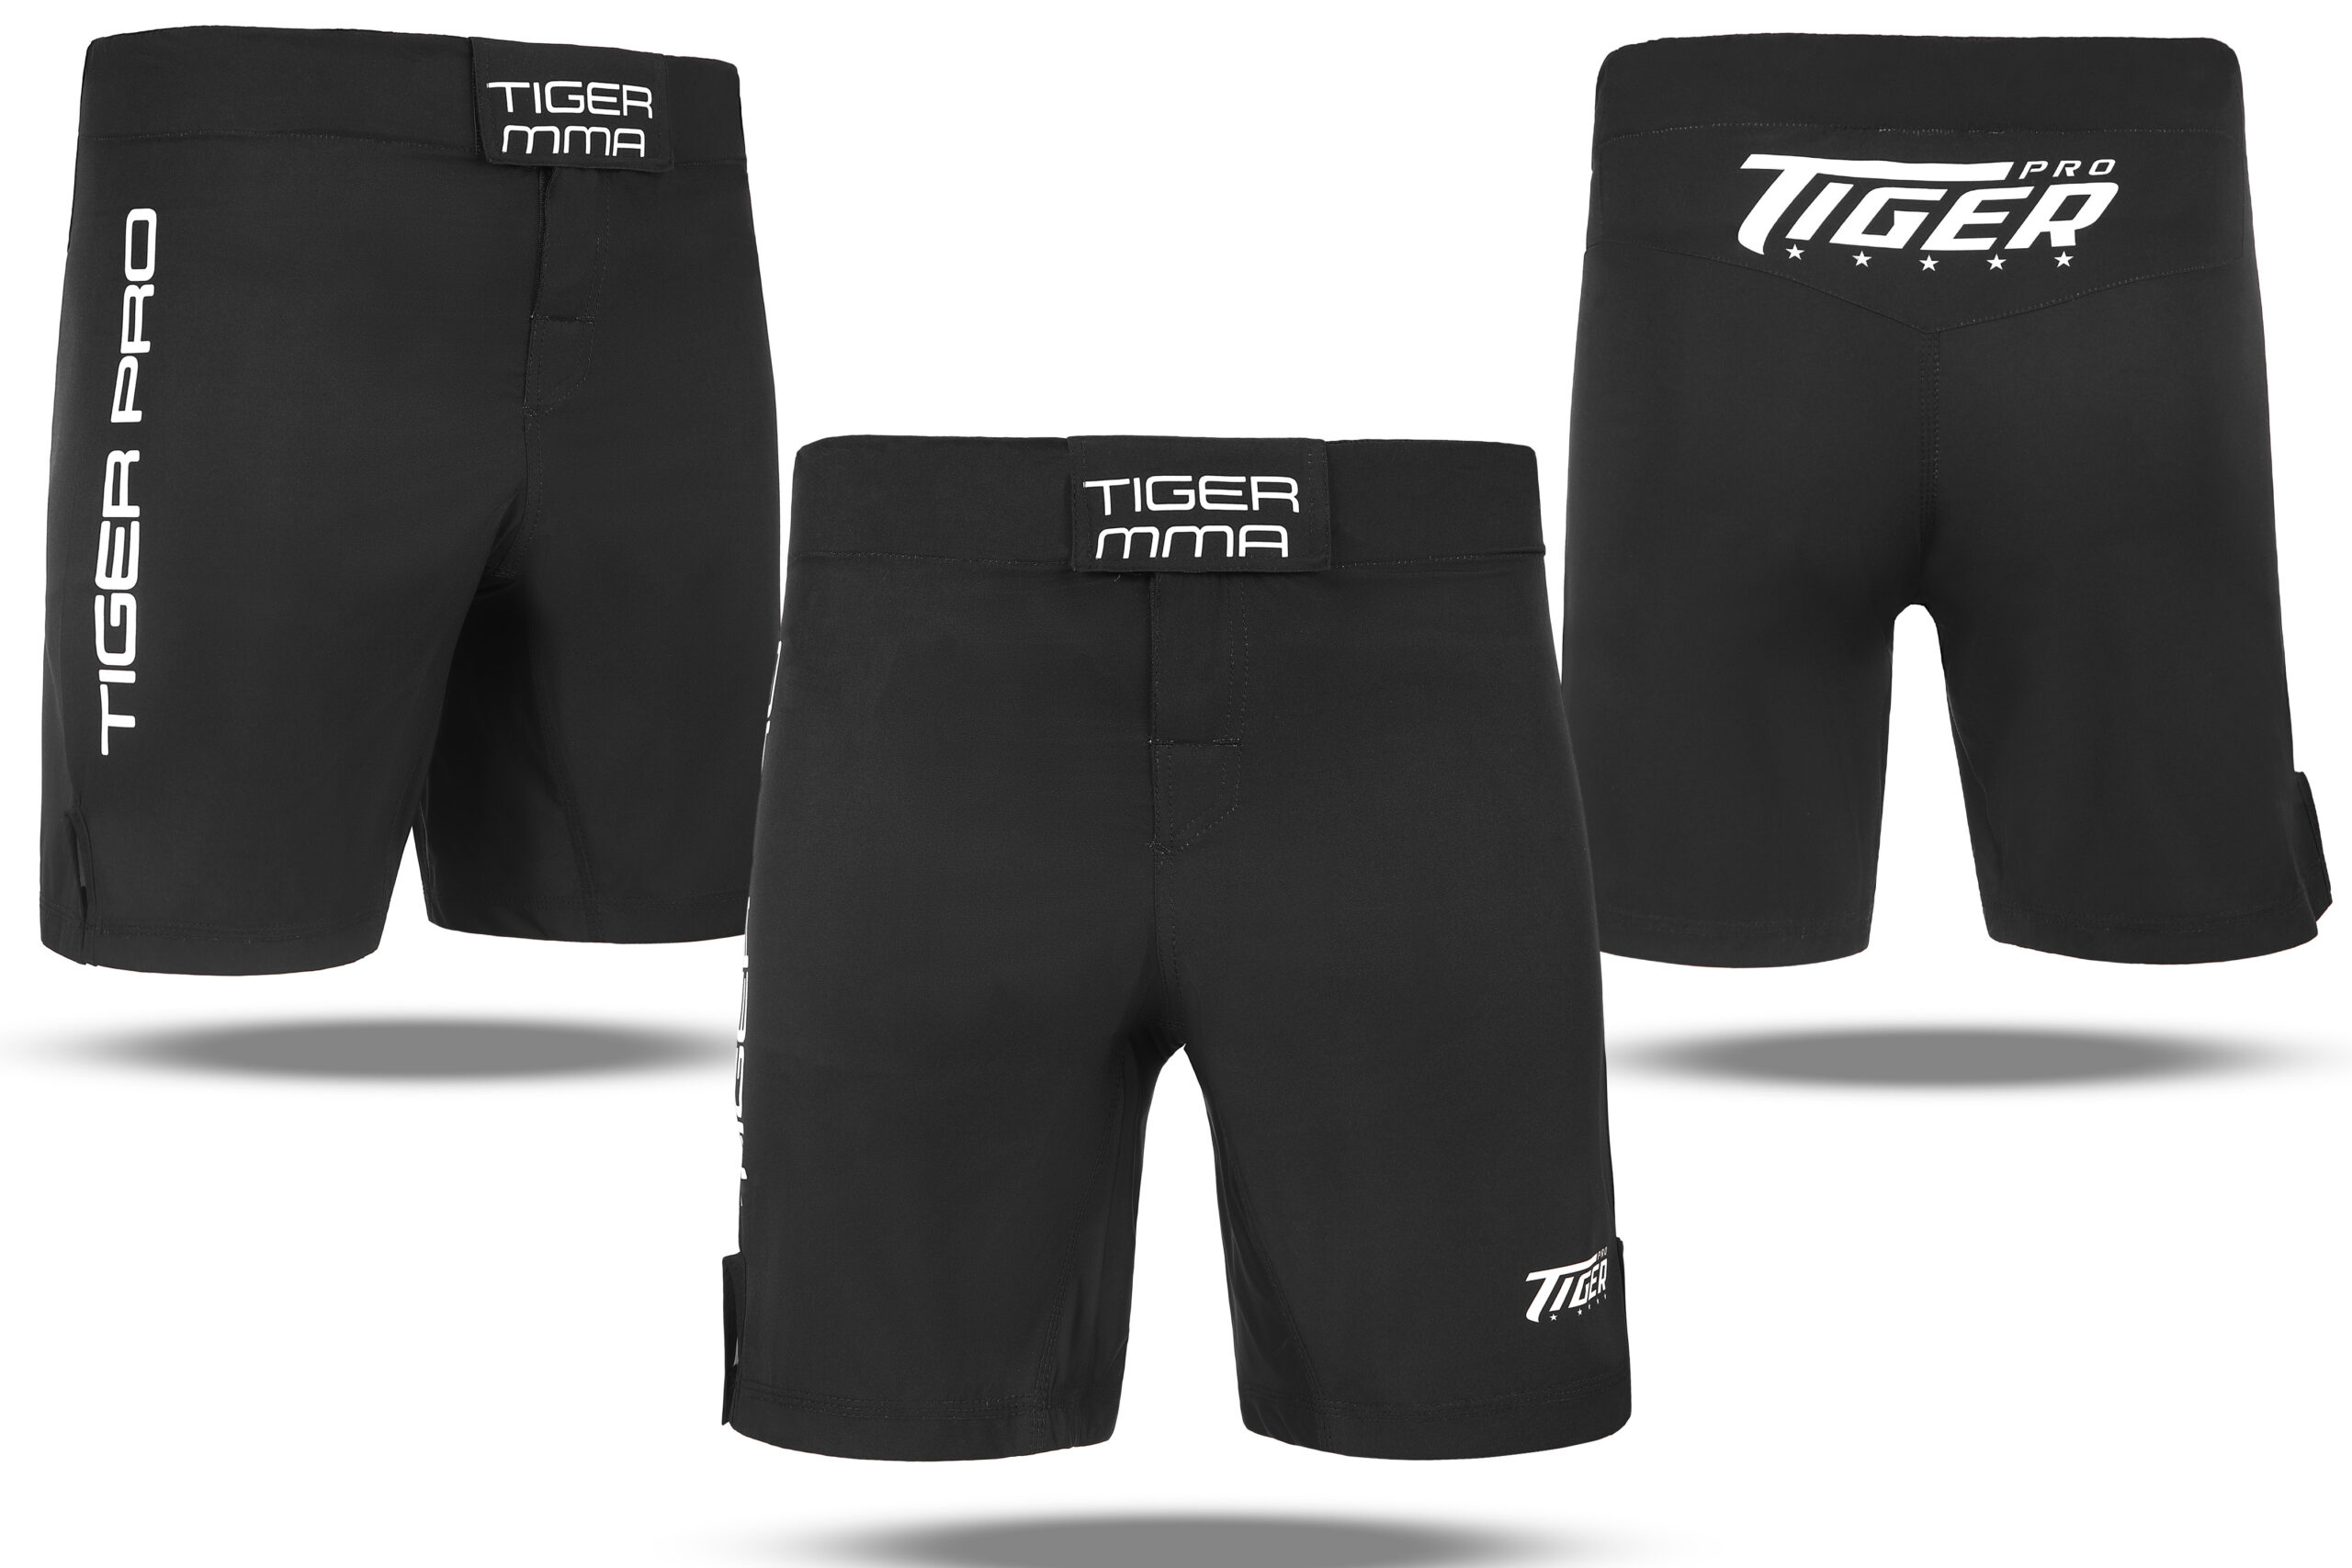 ULTRA LITE MMA SHORT FULLY STRETCHED FABRIC